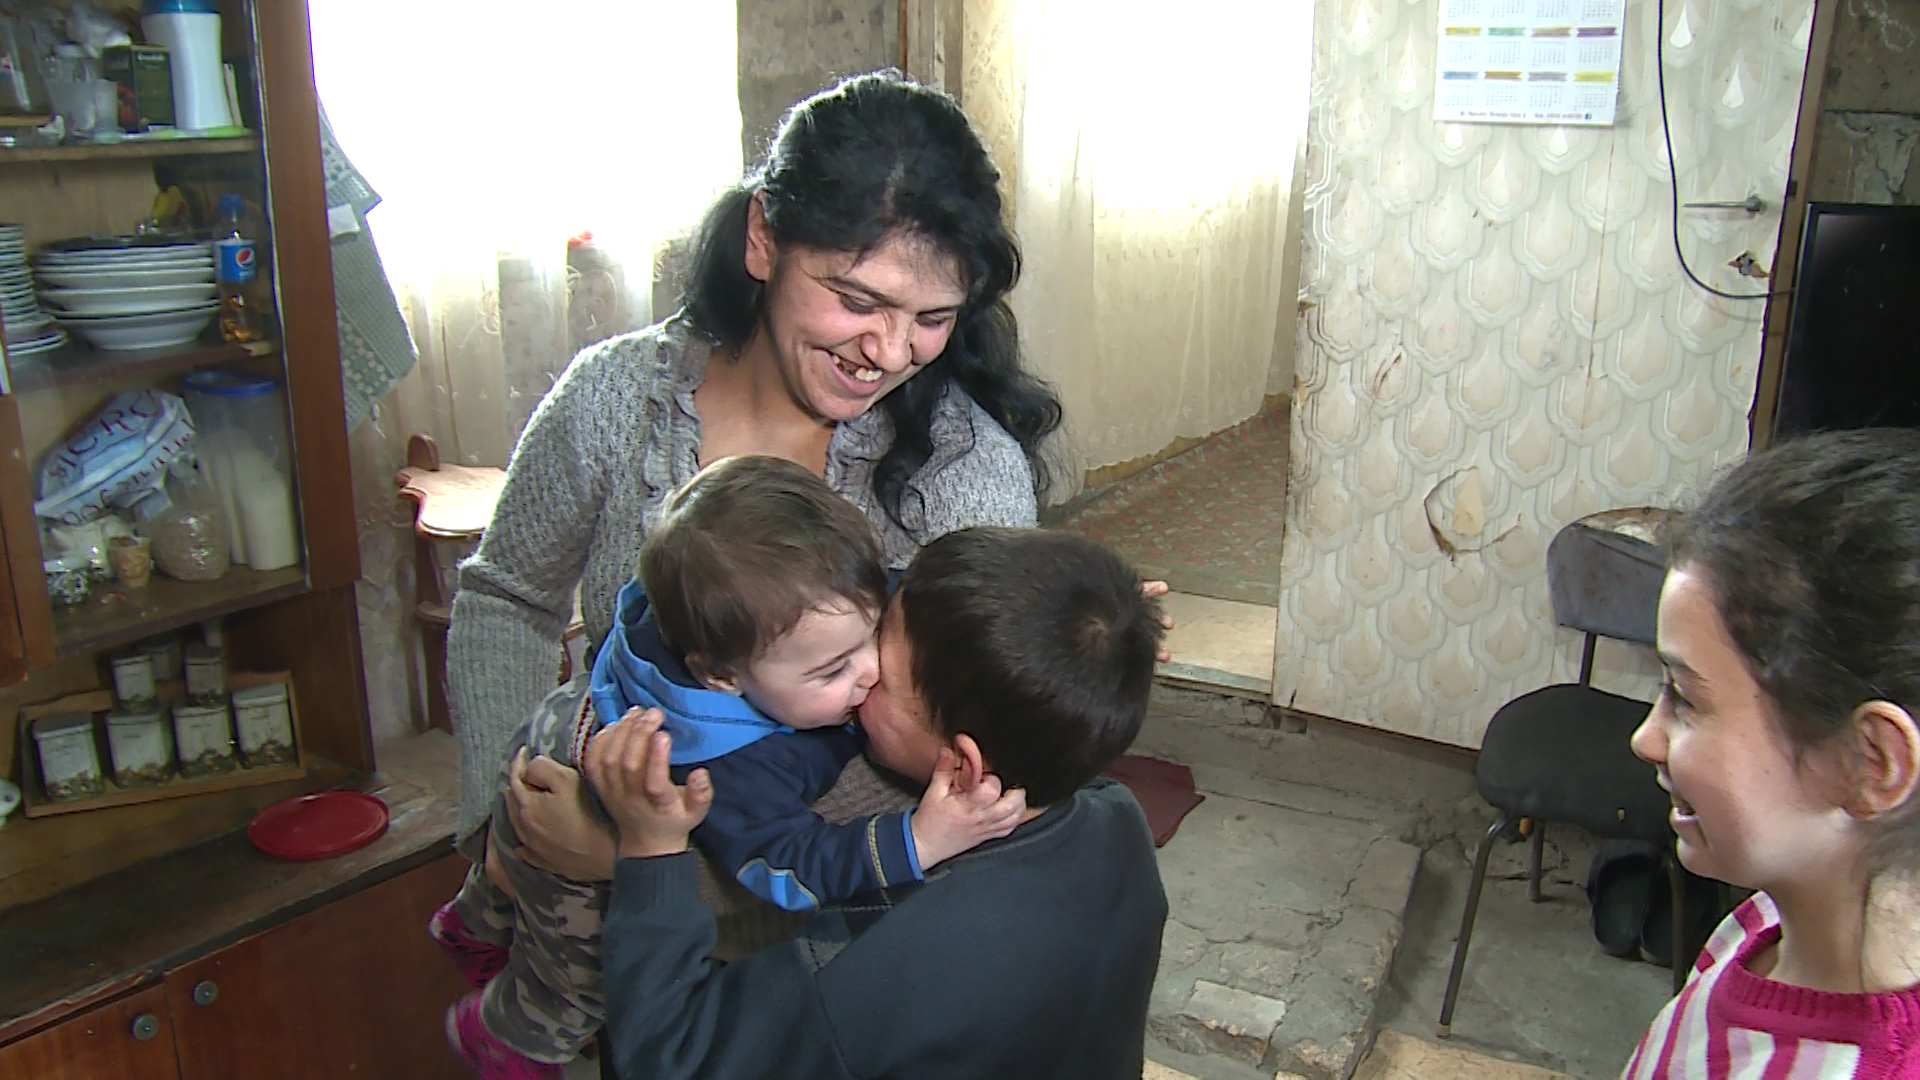 78 million AMD were allocated to mothers with multiple children of Gyumri by philanthropist Karen Vardanyan